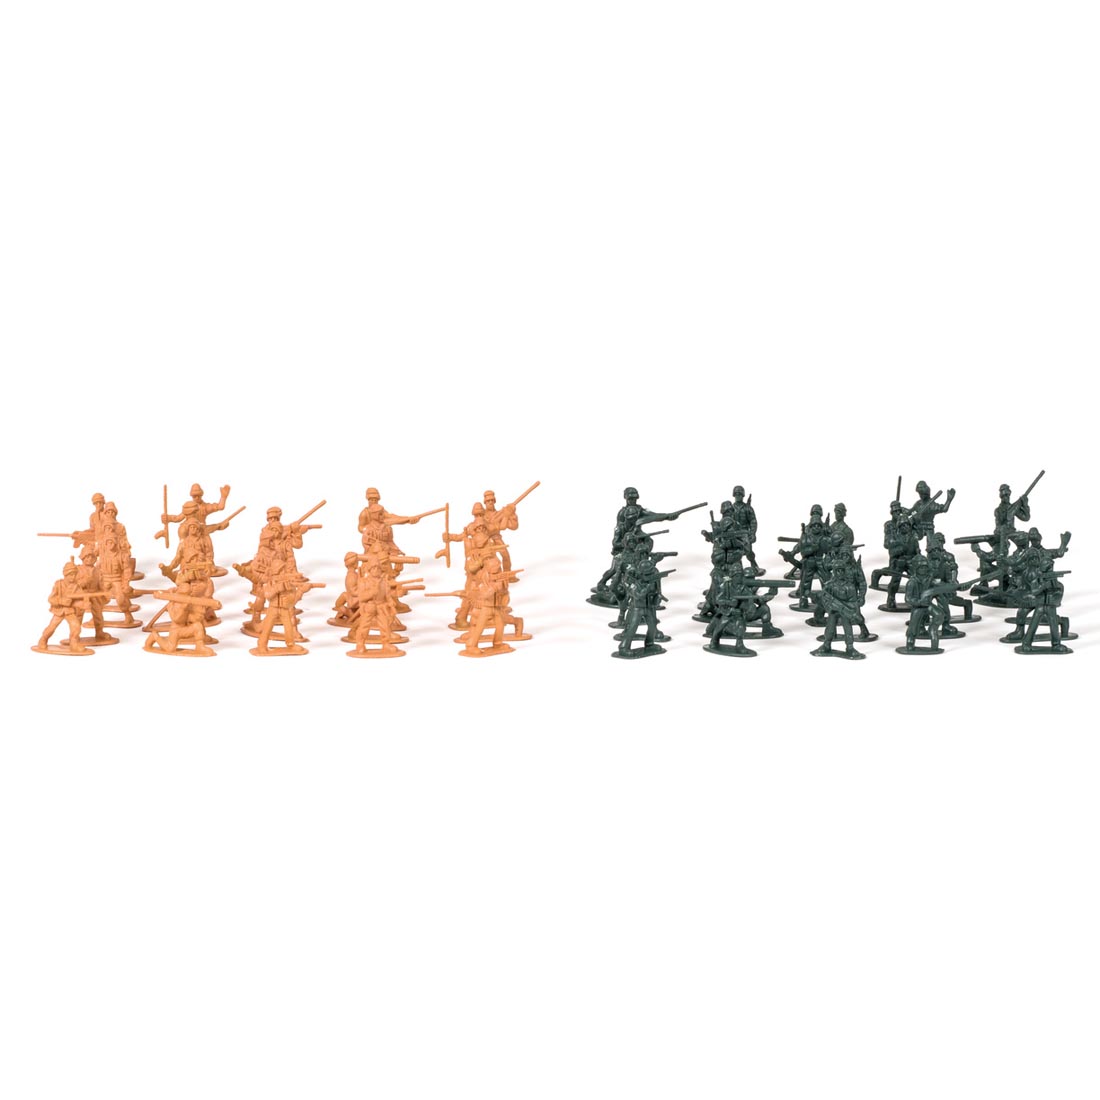 Retro Toys Mini Soldiers in two different colors